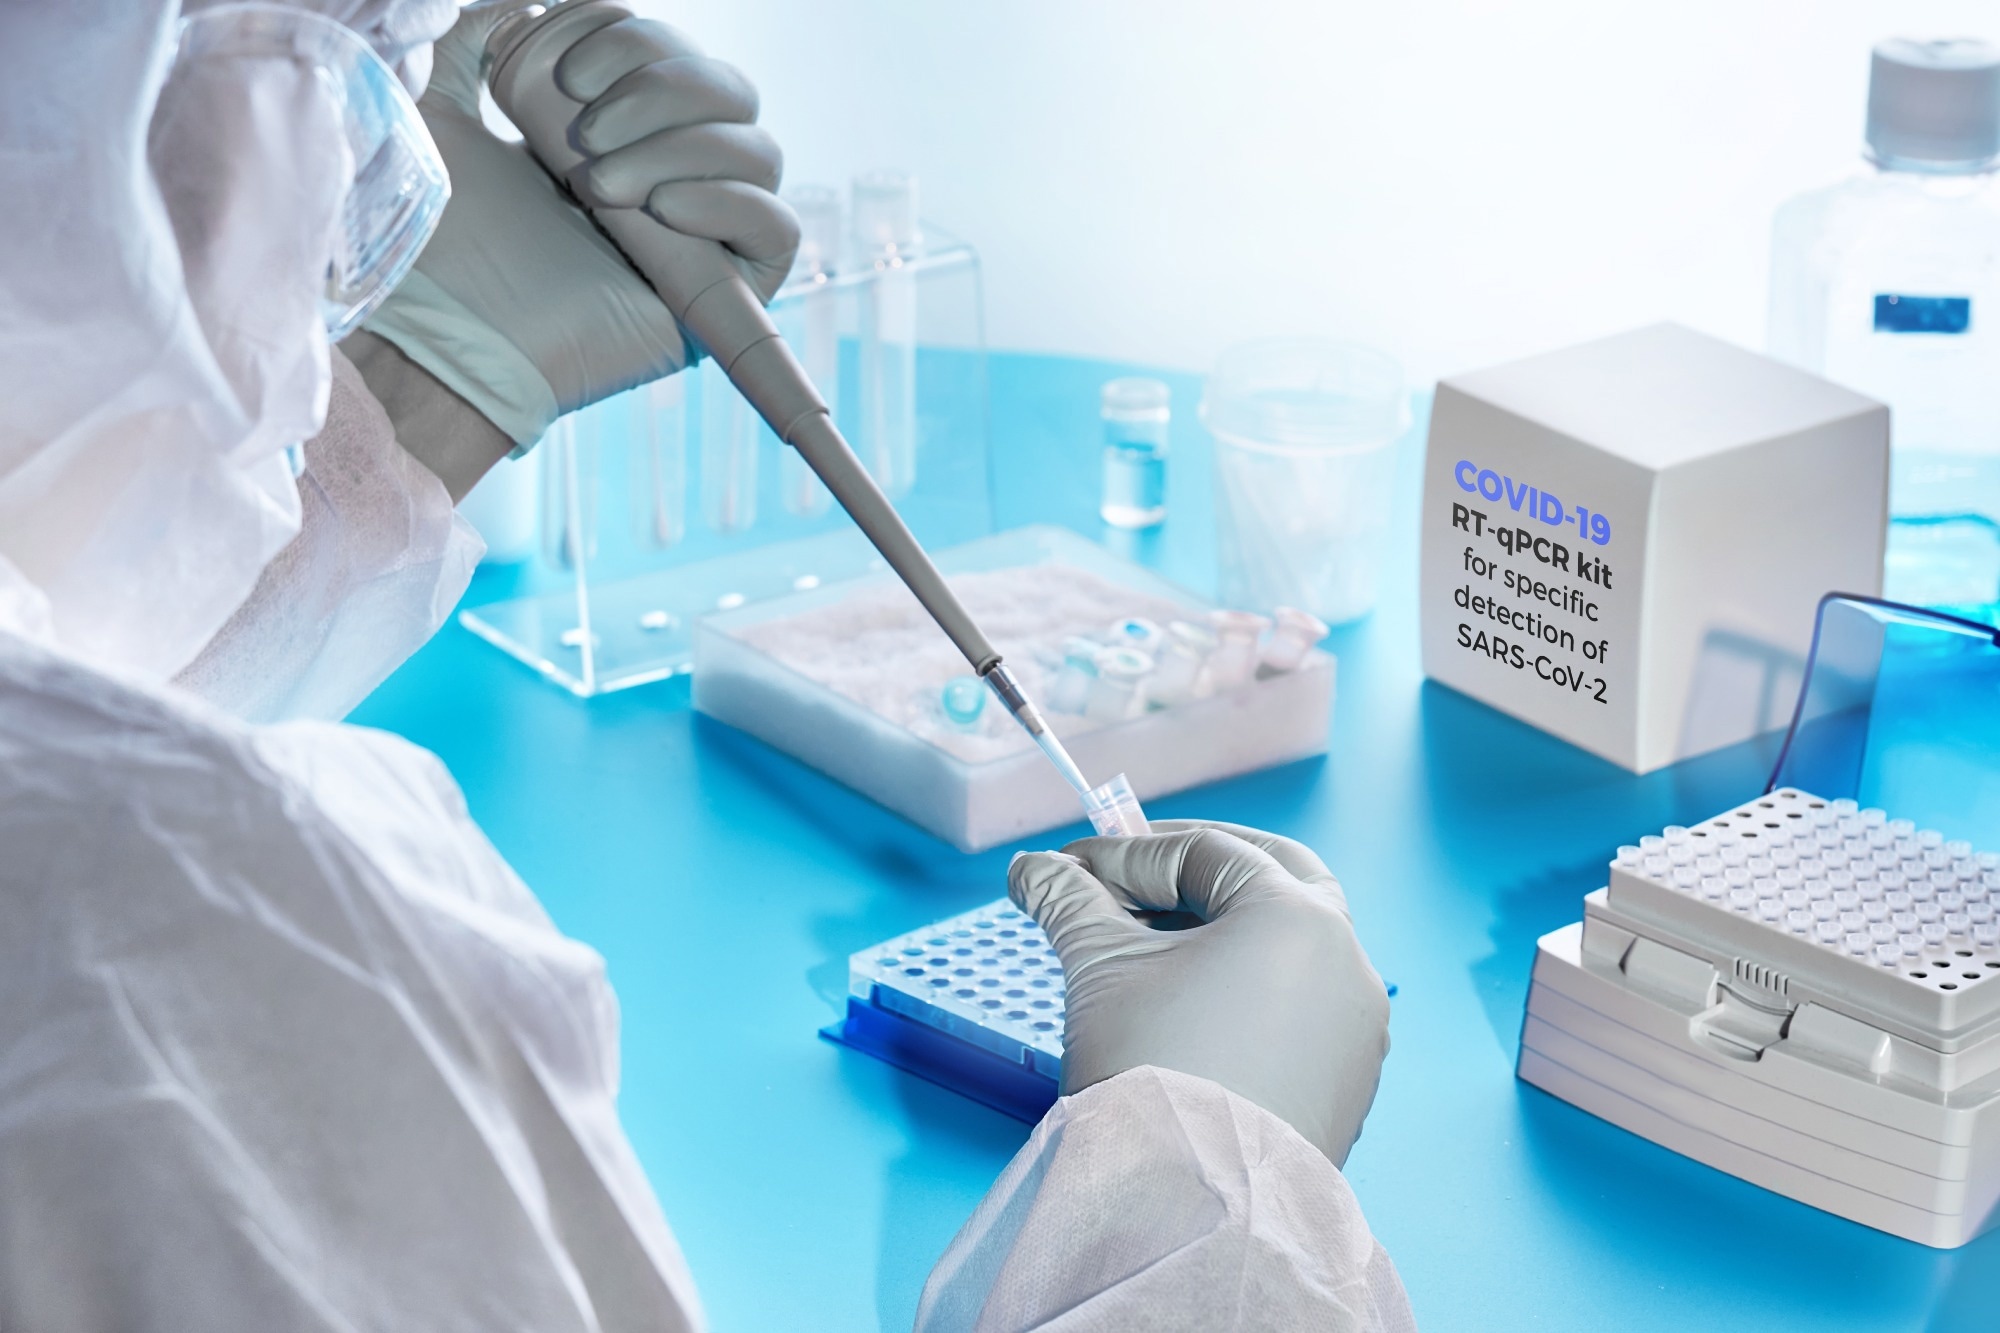 Study: Evaluation of a Commercially Available Rapid RT-PCR Assay’s Detection of SARS-CoV-2 Novel Variants. Image Credit: tilialucida/Shutterstock